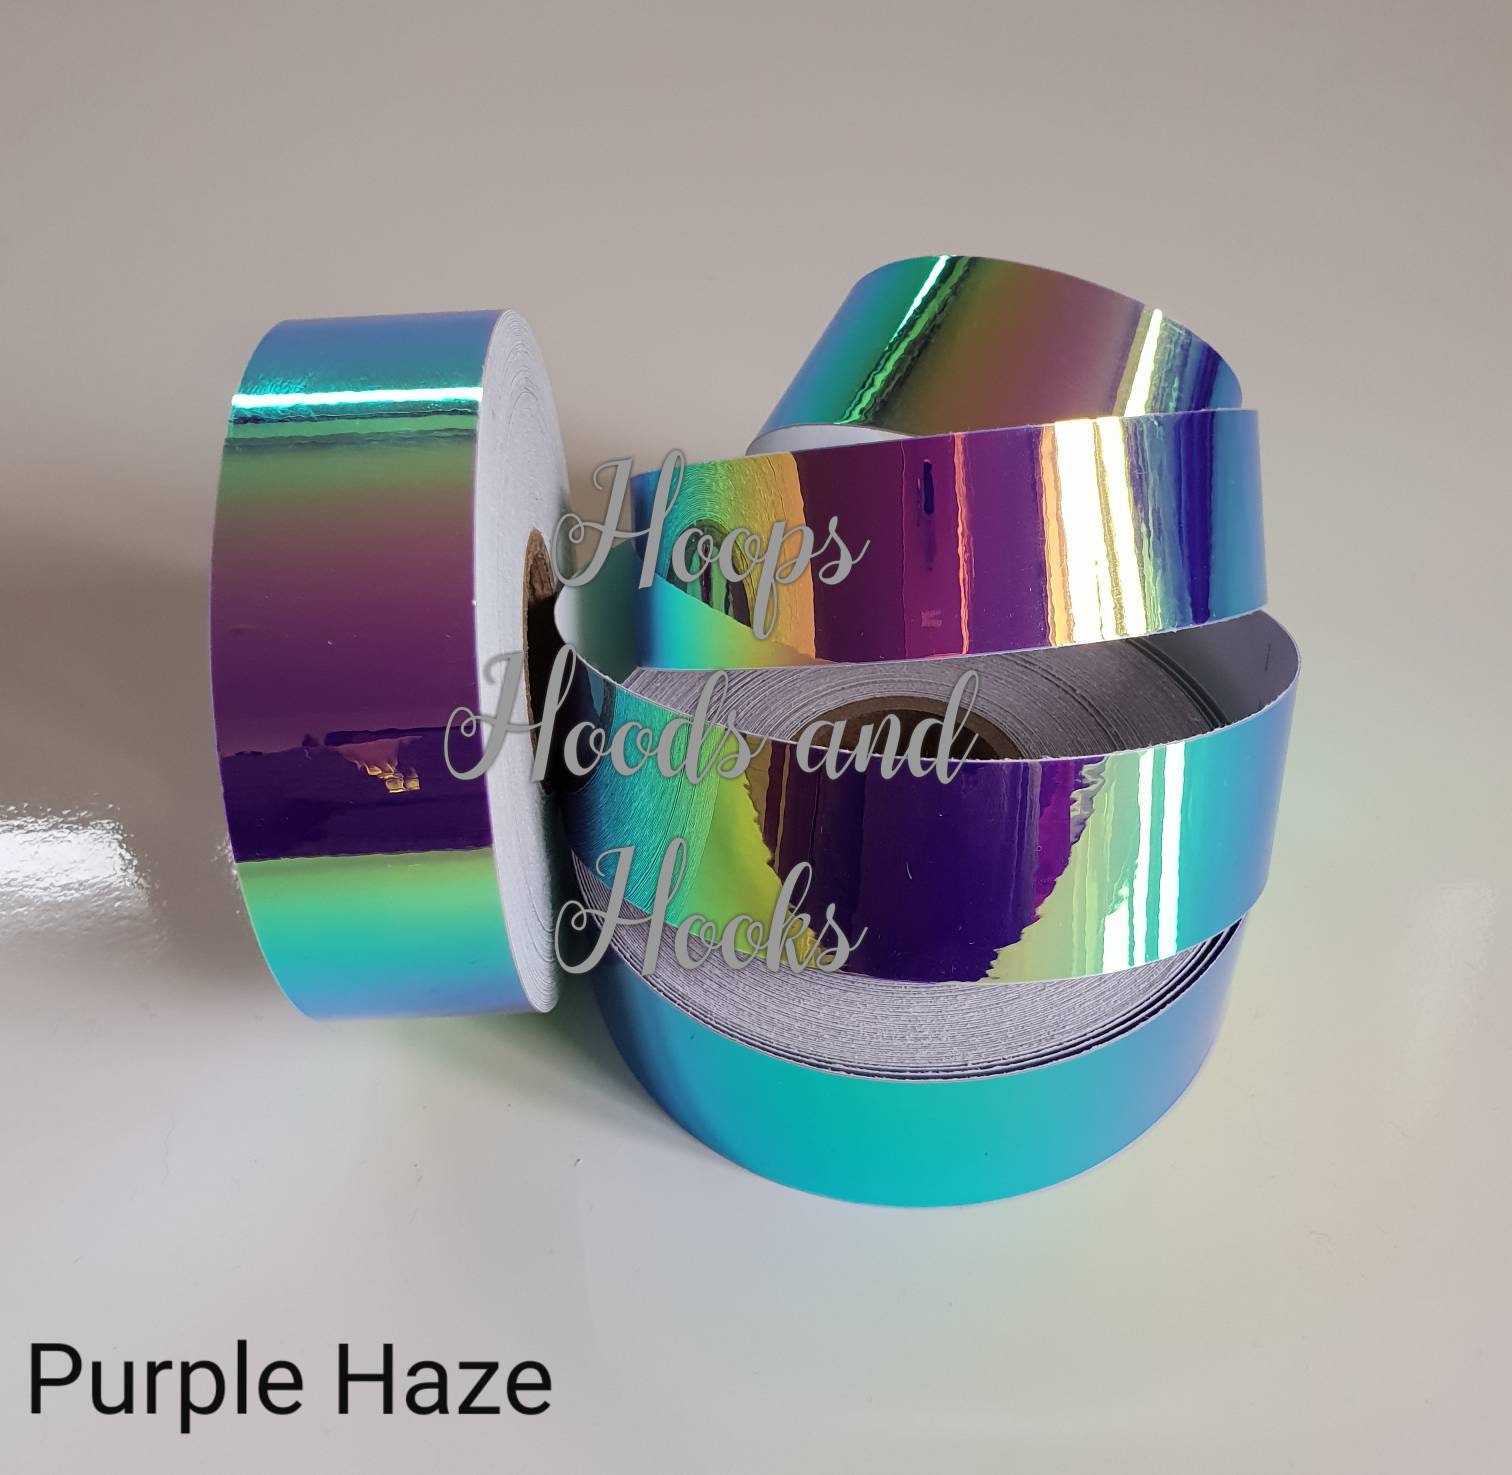 Holographic Taped Beginner Hoop - Holographic Tape w/ Gaffer Grip